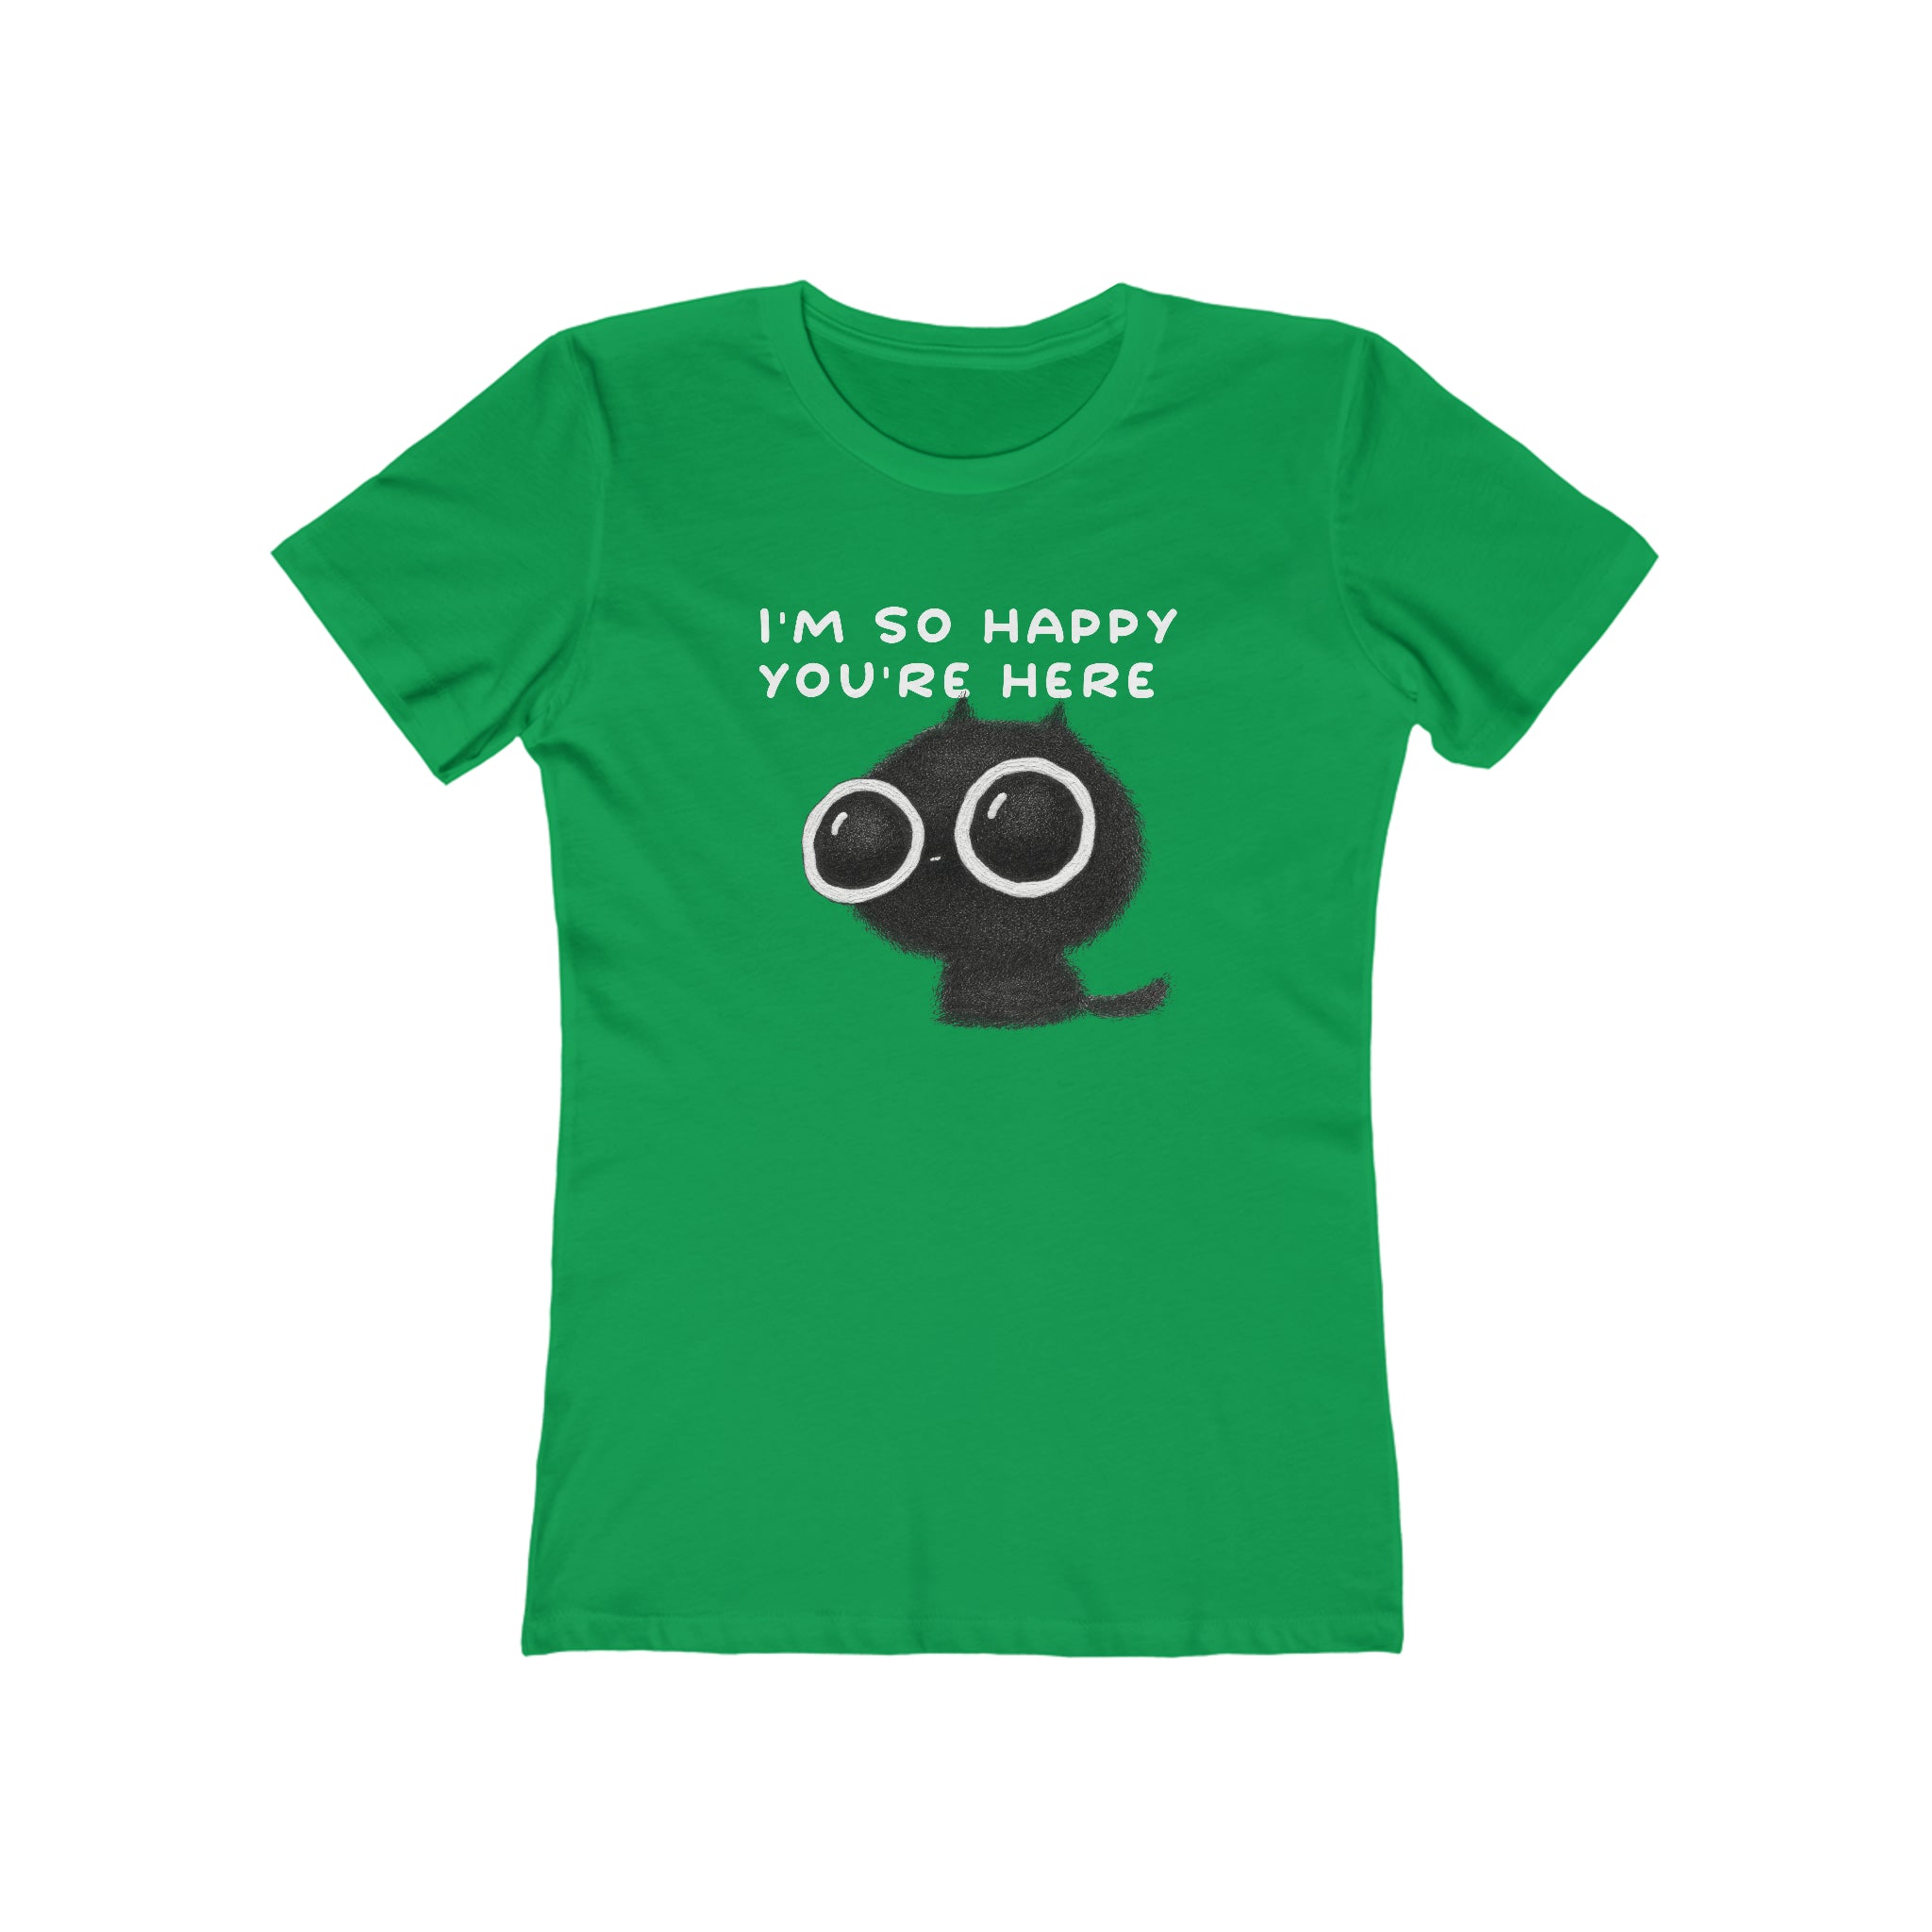 I'm So Happy You're Here : Women's Cotton T-Shirt by Bella+Canvas